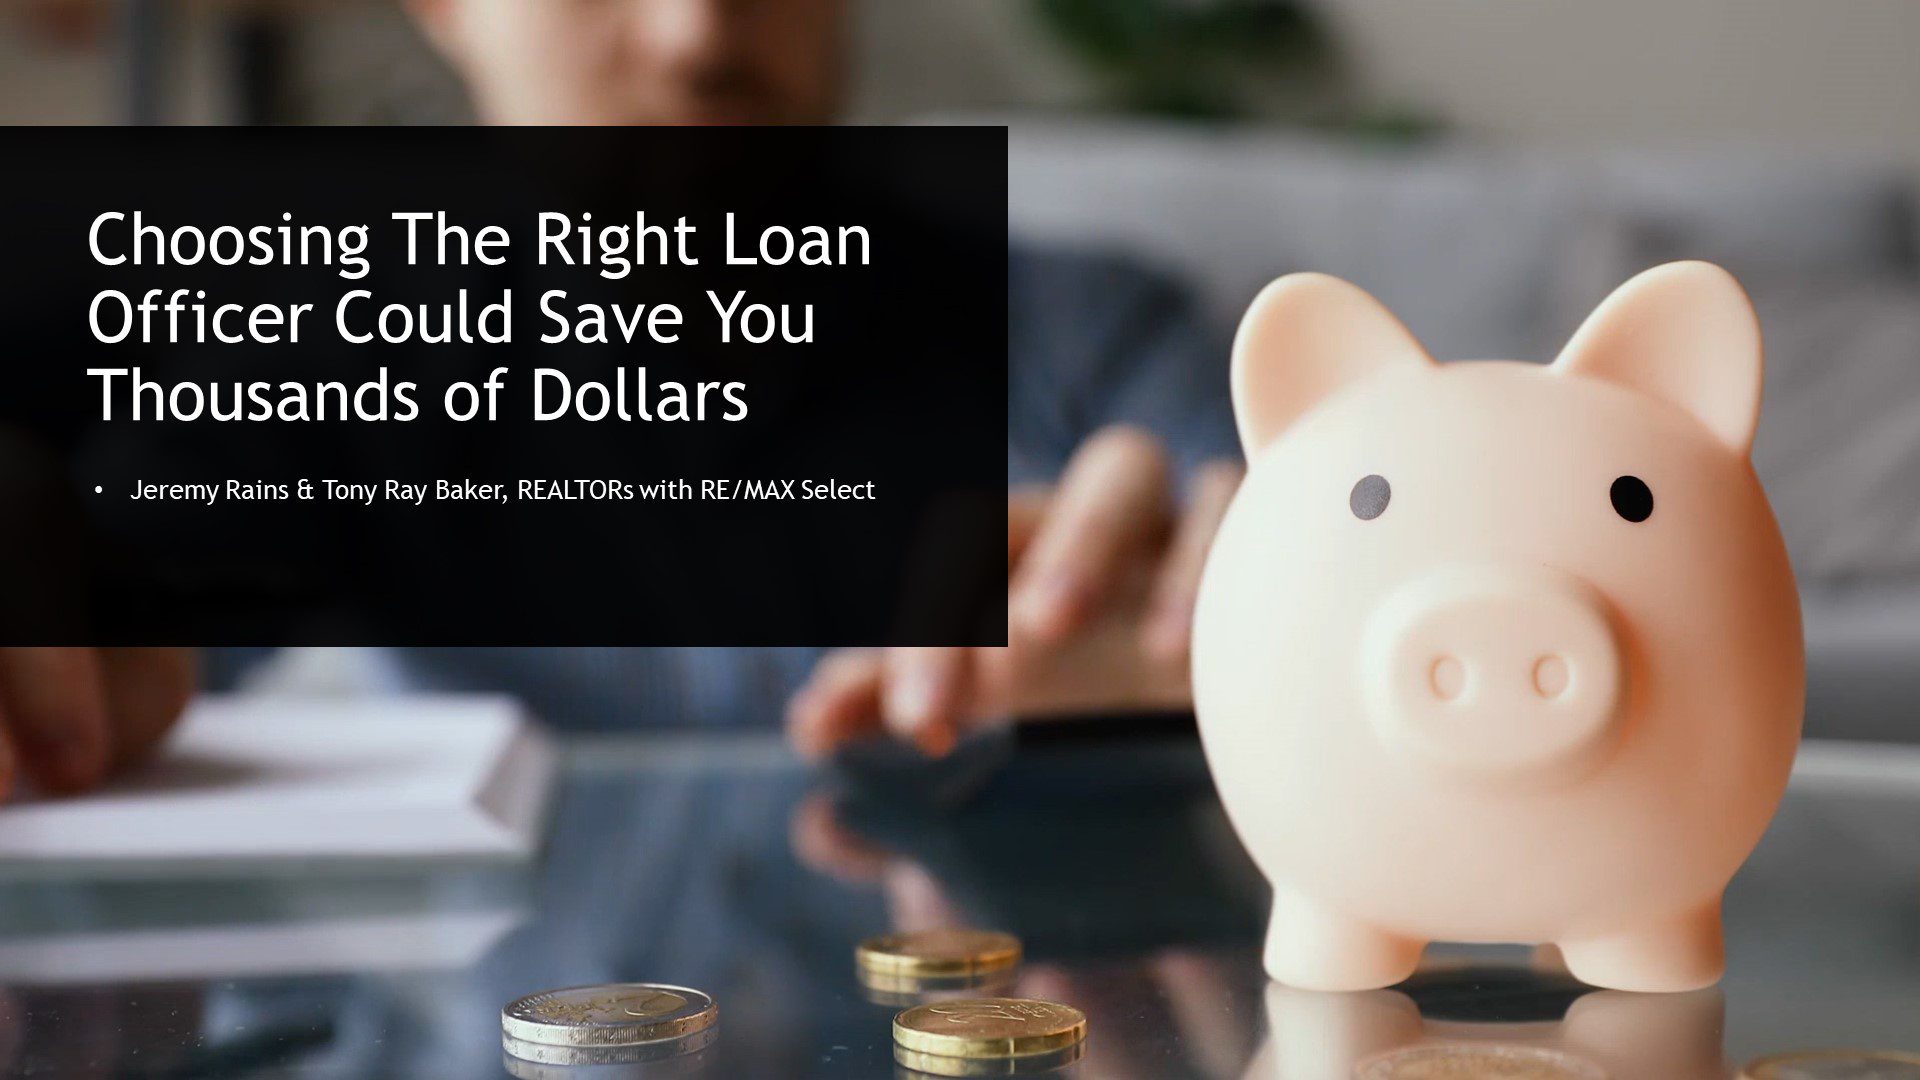 Choosing The Right Loan Officer Could Save You Thousands of Dollars